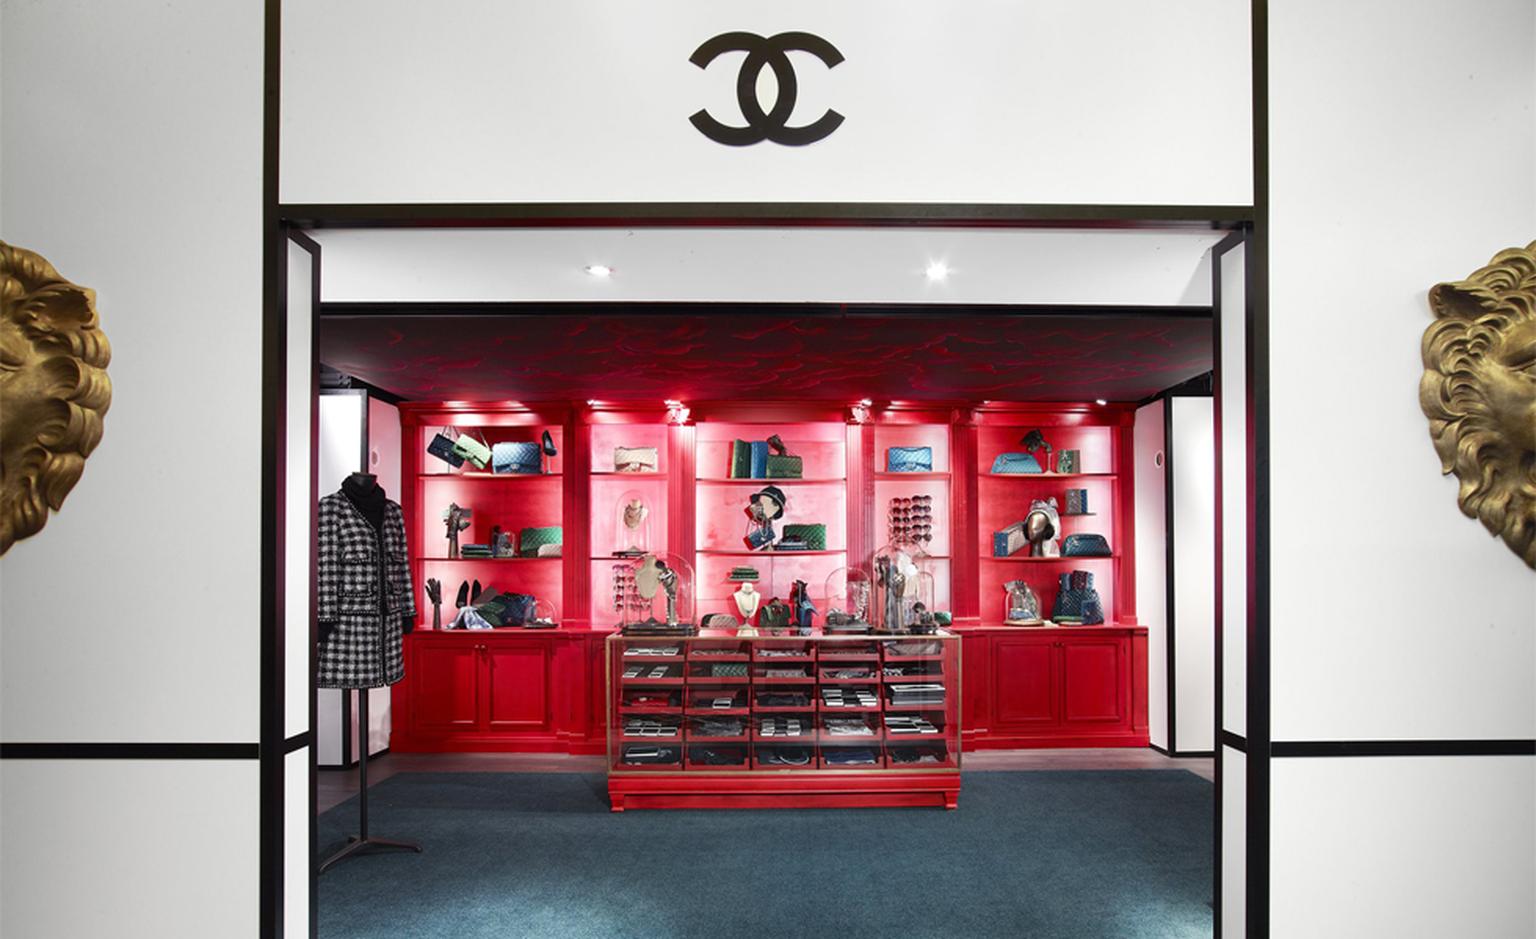 The Edit LDN opens first UK boutique in Harrods